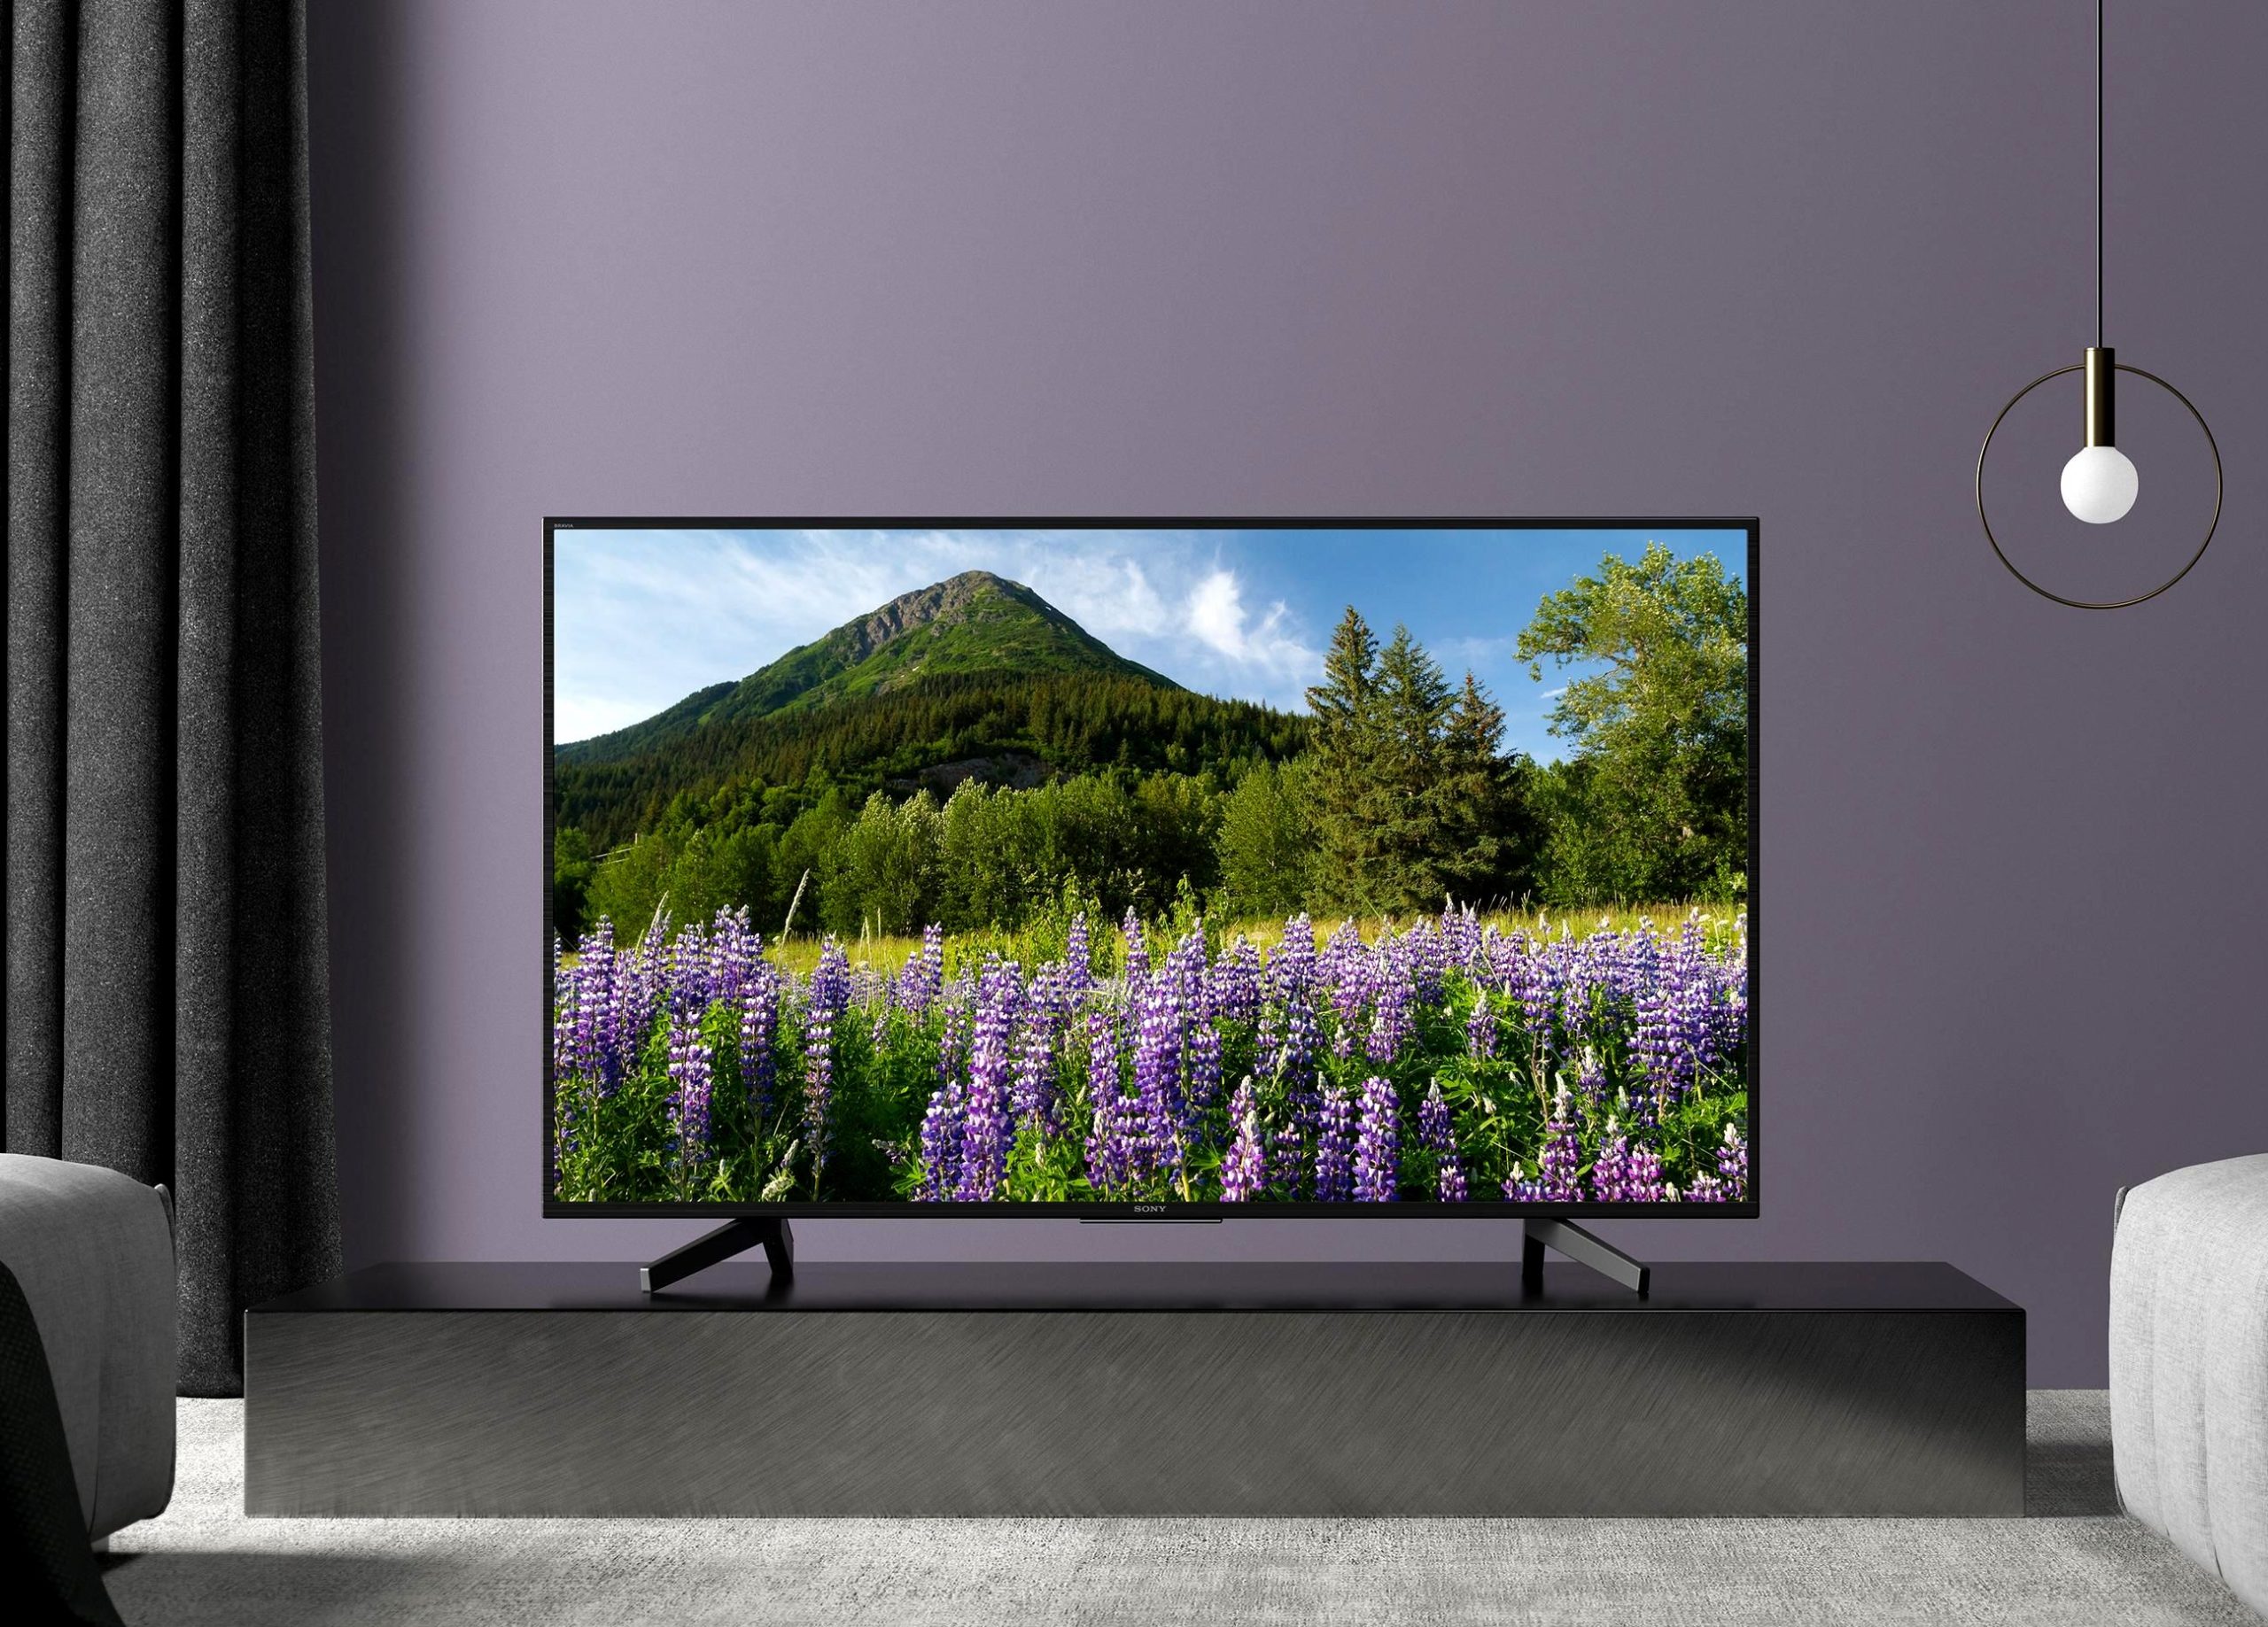 Rating of the best Chinese TVs for 2022